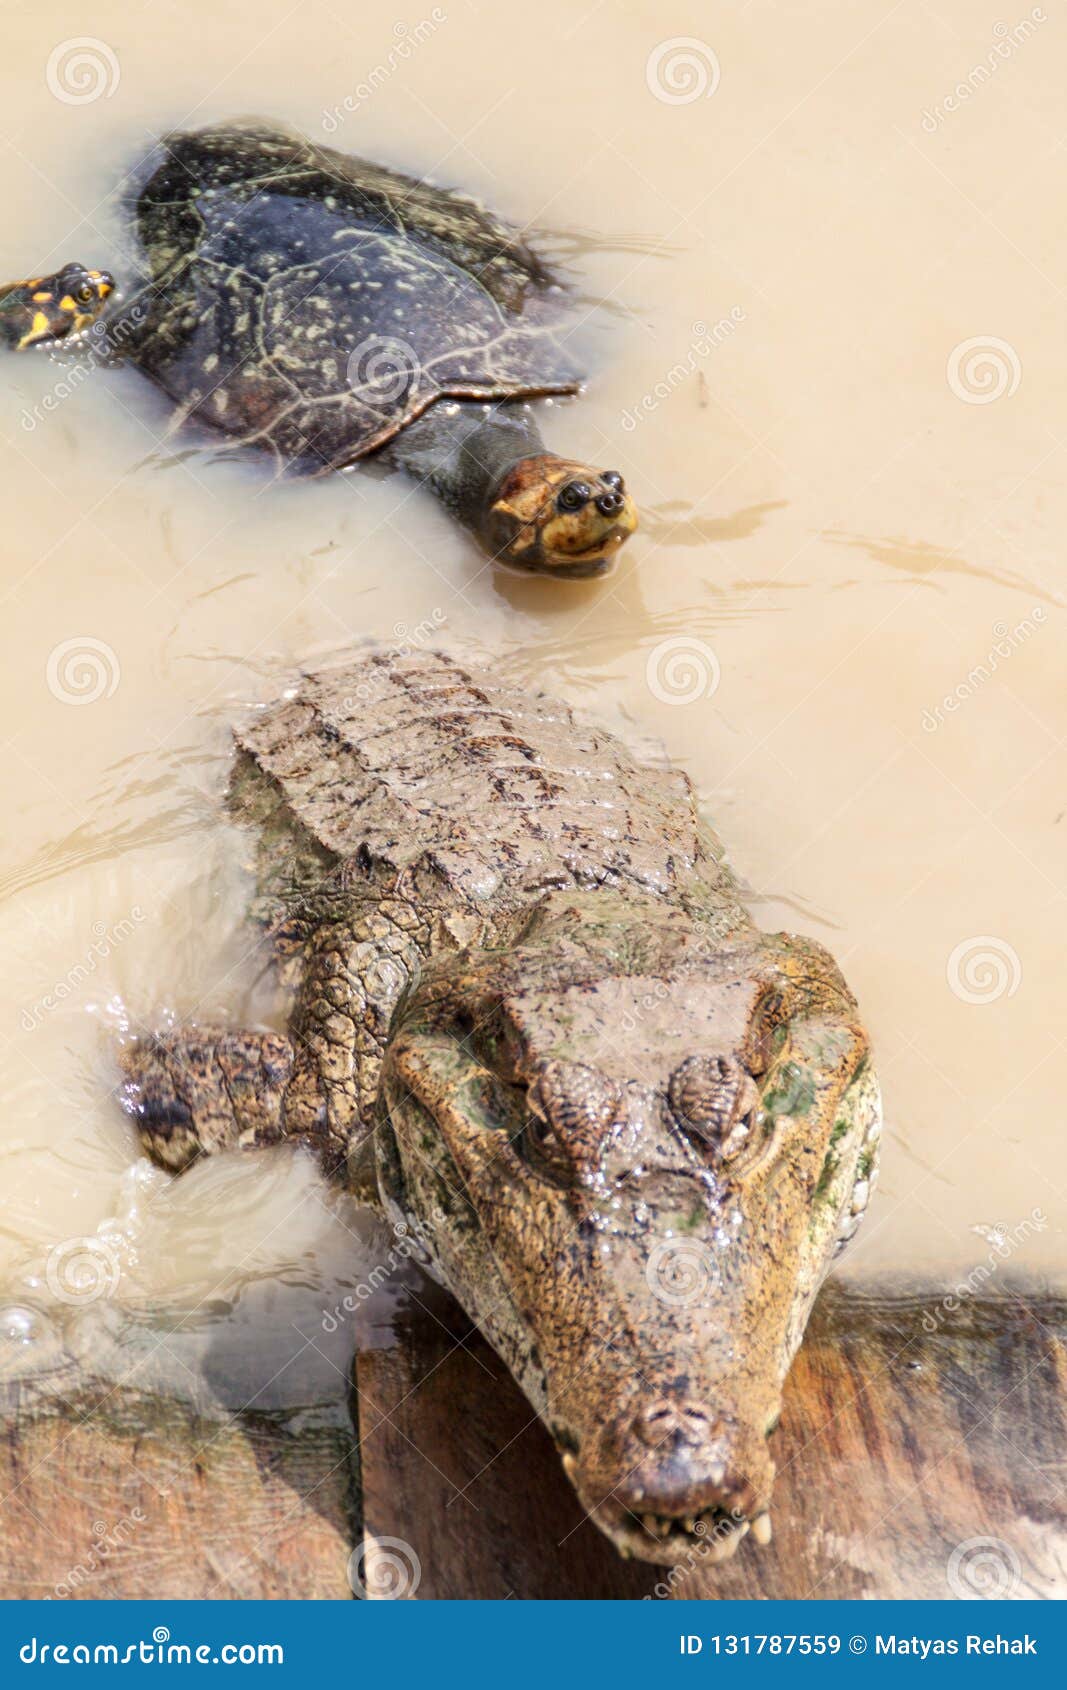 Spectacled caiman stock image. Image of peru, america - 131787559